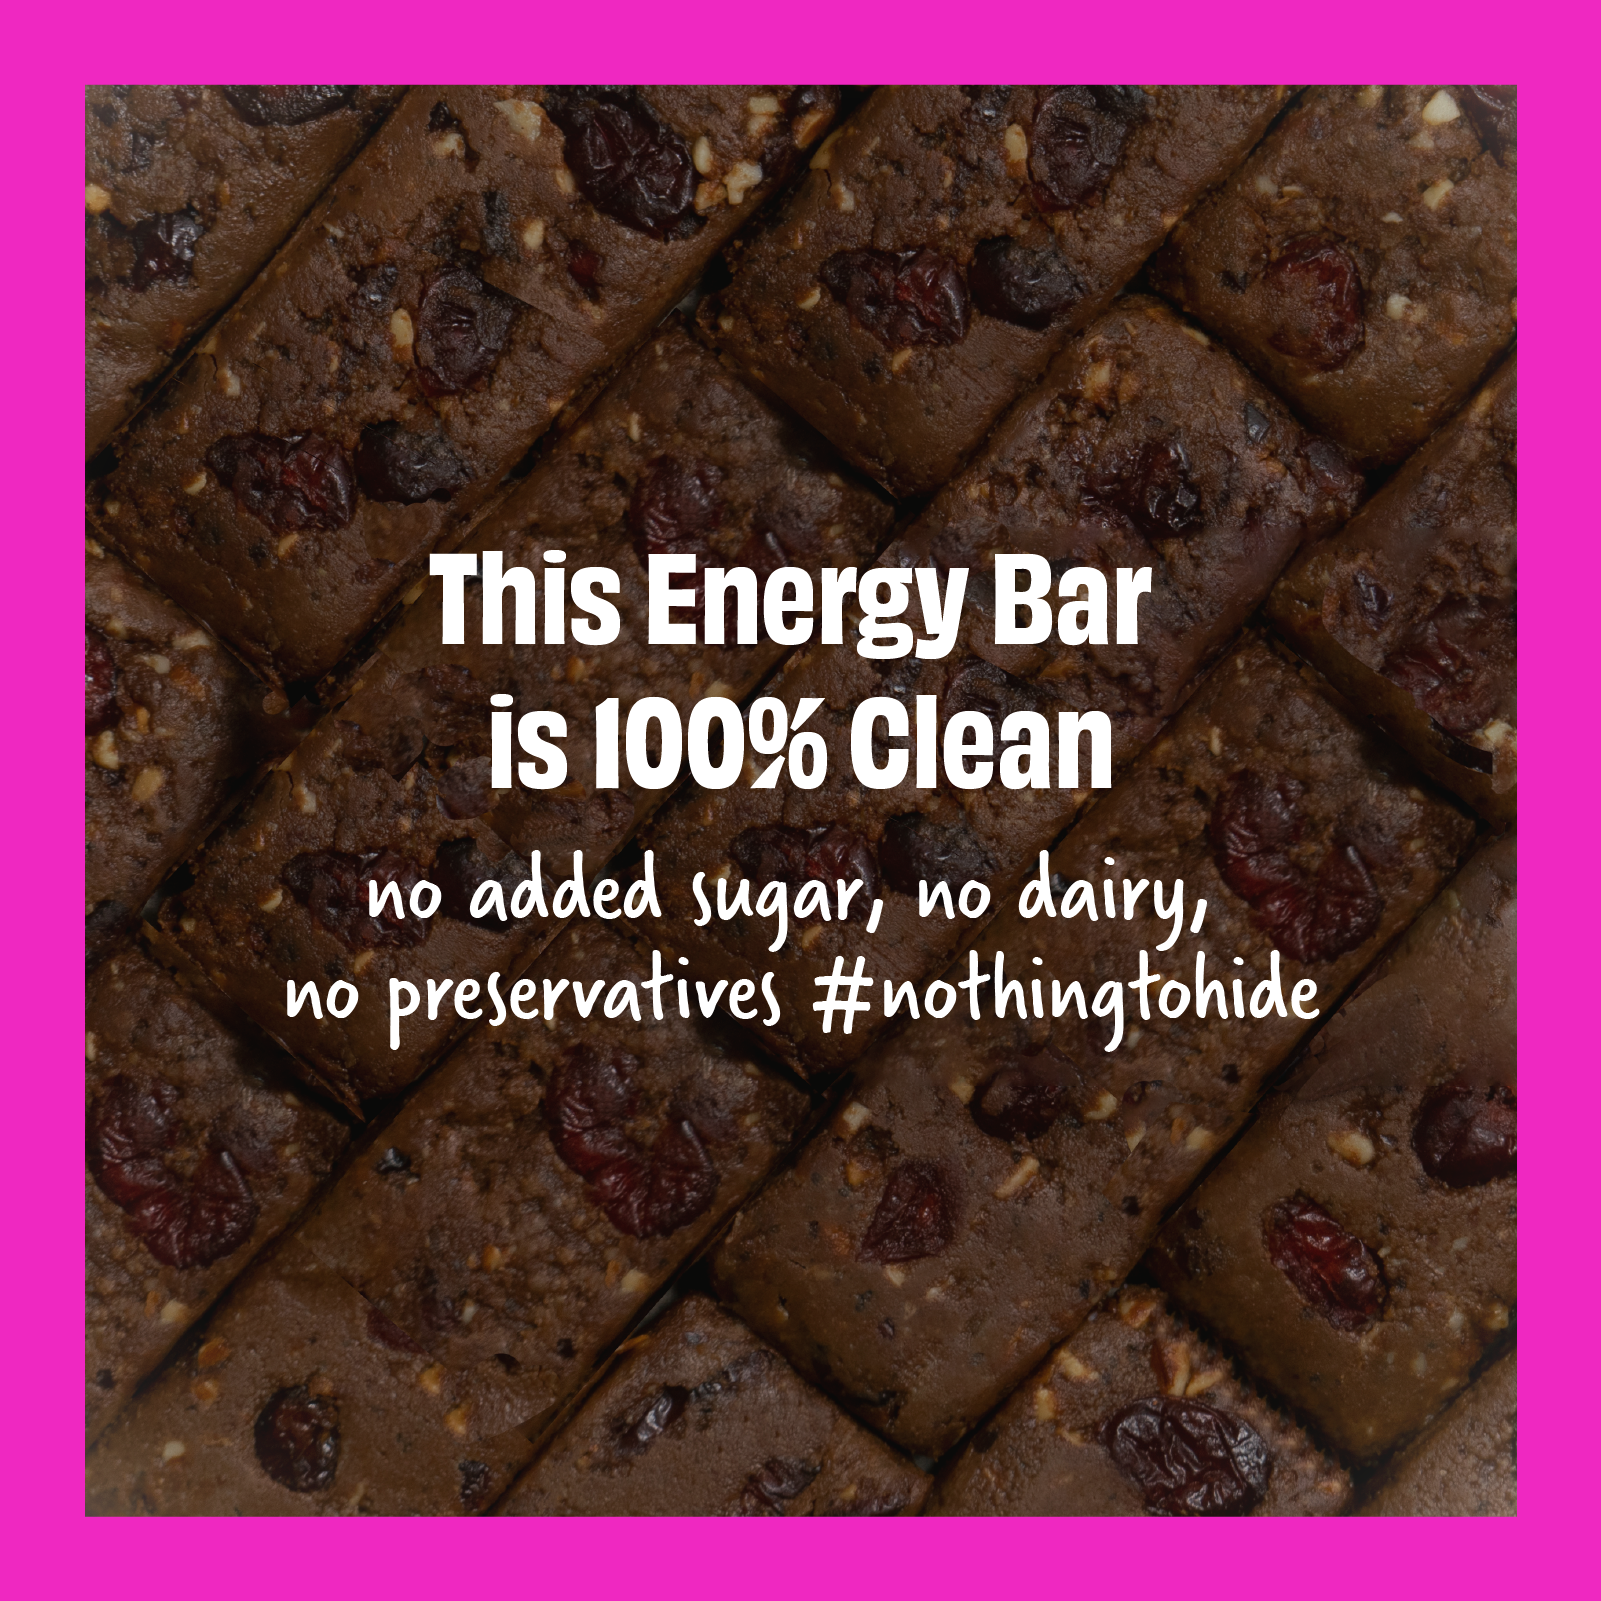 The Whole Truth - Energy Bars | Cocoa Cranberry Fudge | Pack of 6 x 40g | Dairy Free & Sugarfree | No Artificial Sweetener | Vegan | No Preservatives | All Natural | Healthy Snack